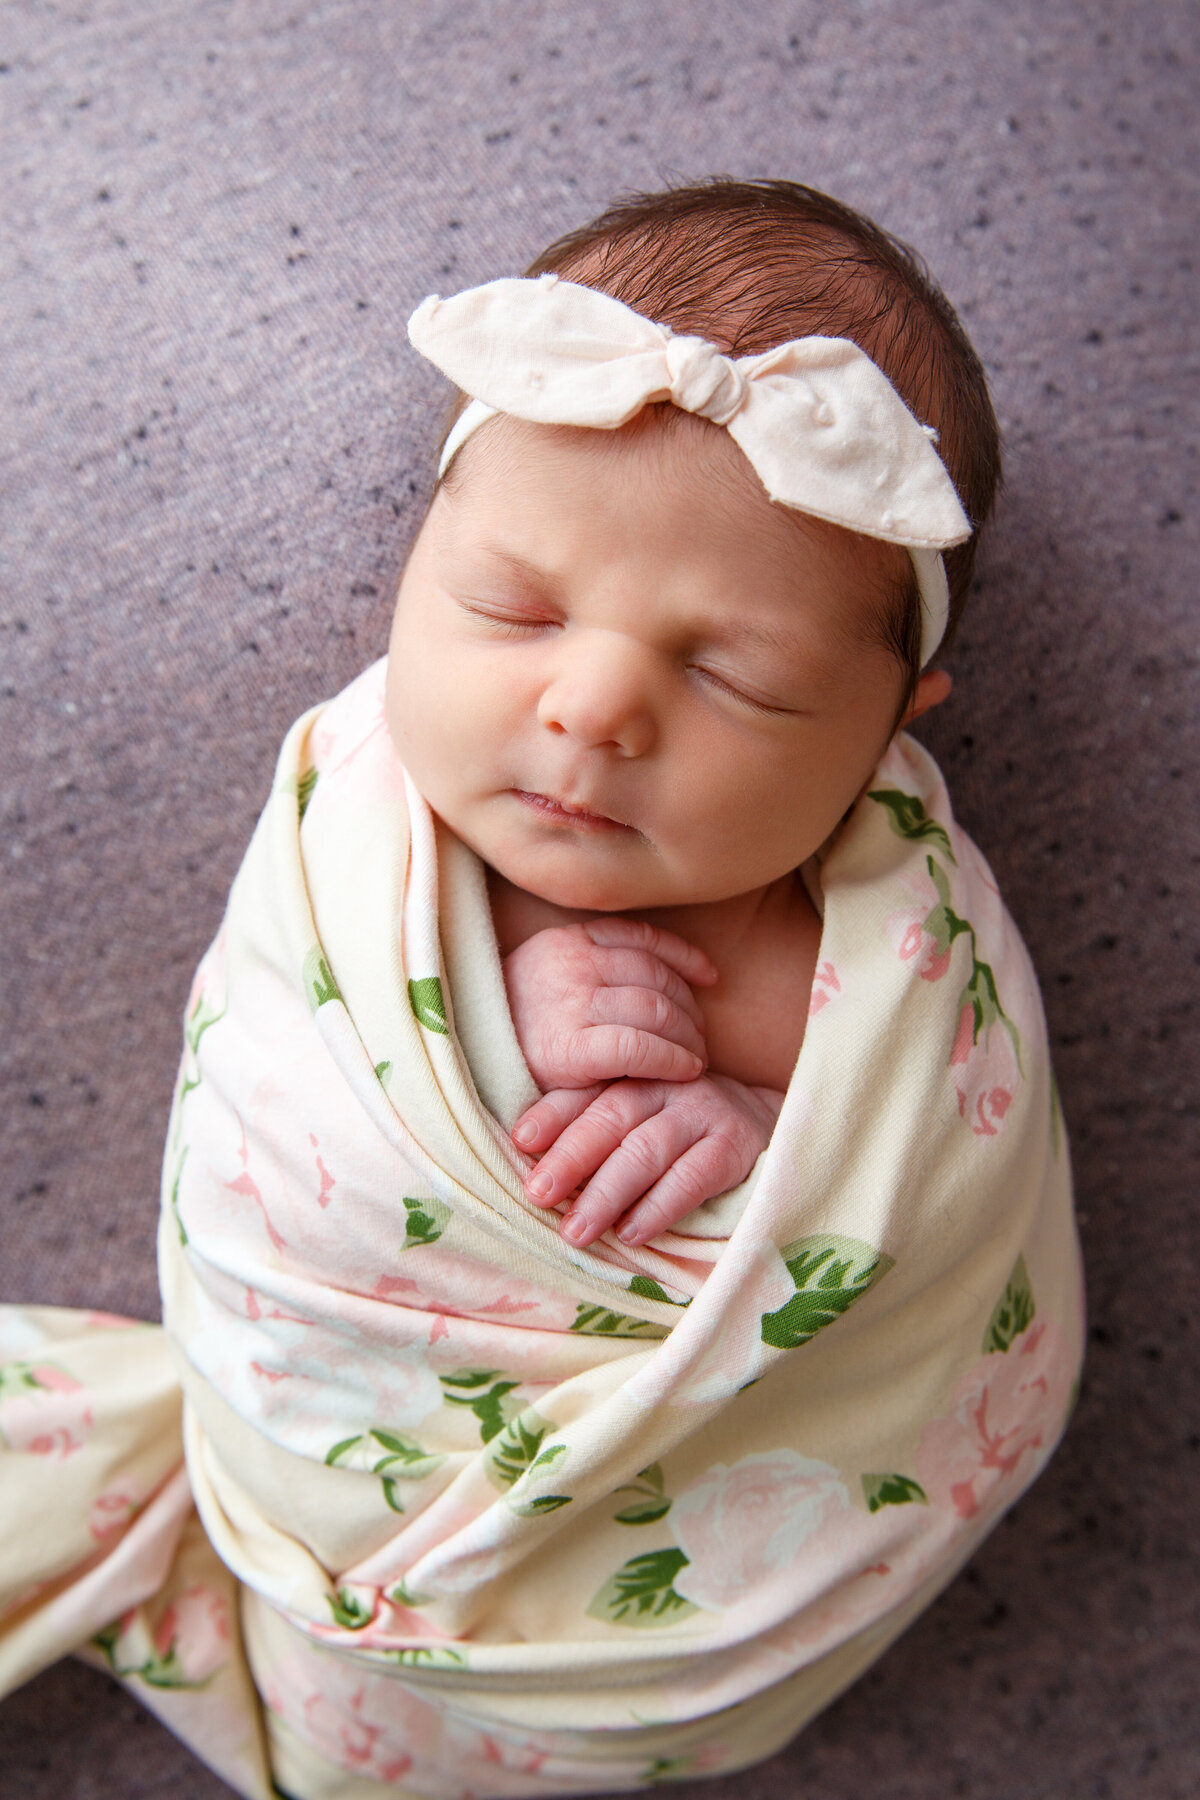 Picture of a newborn baby girl wrapped in a floral blanket with a bow on her head